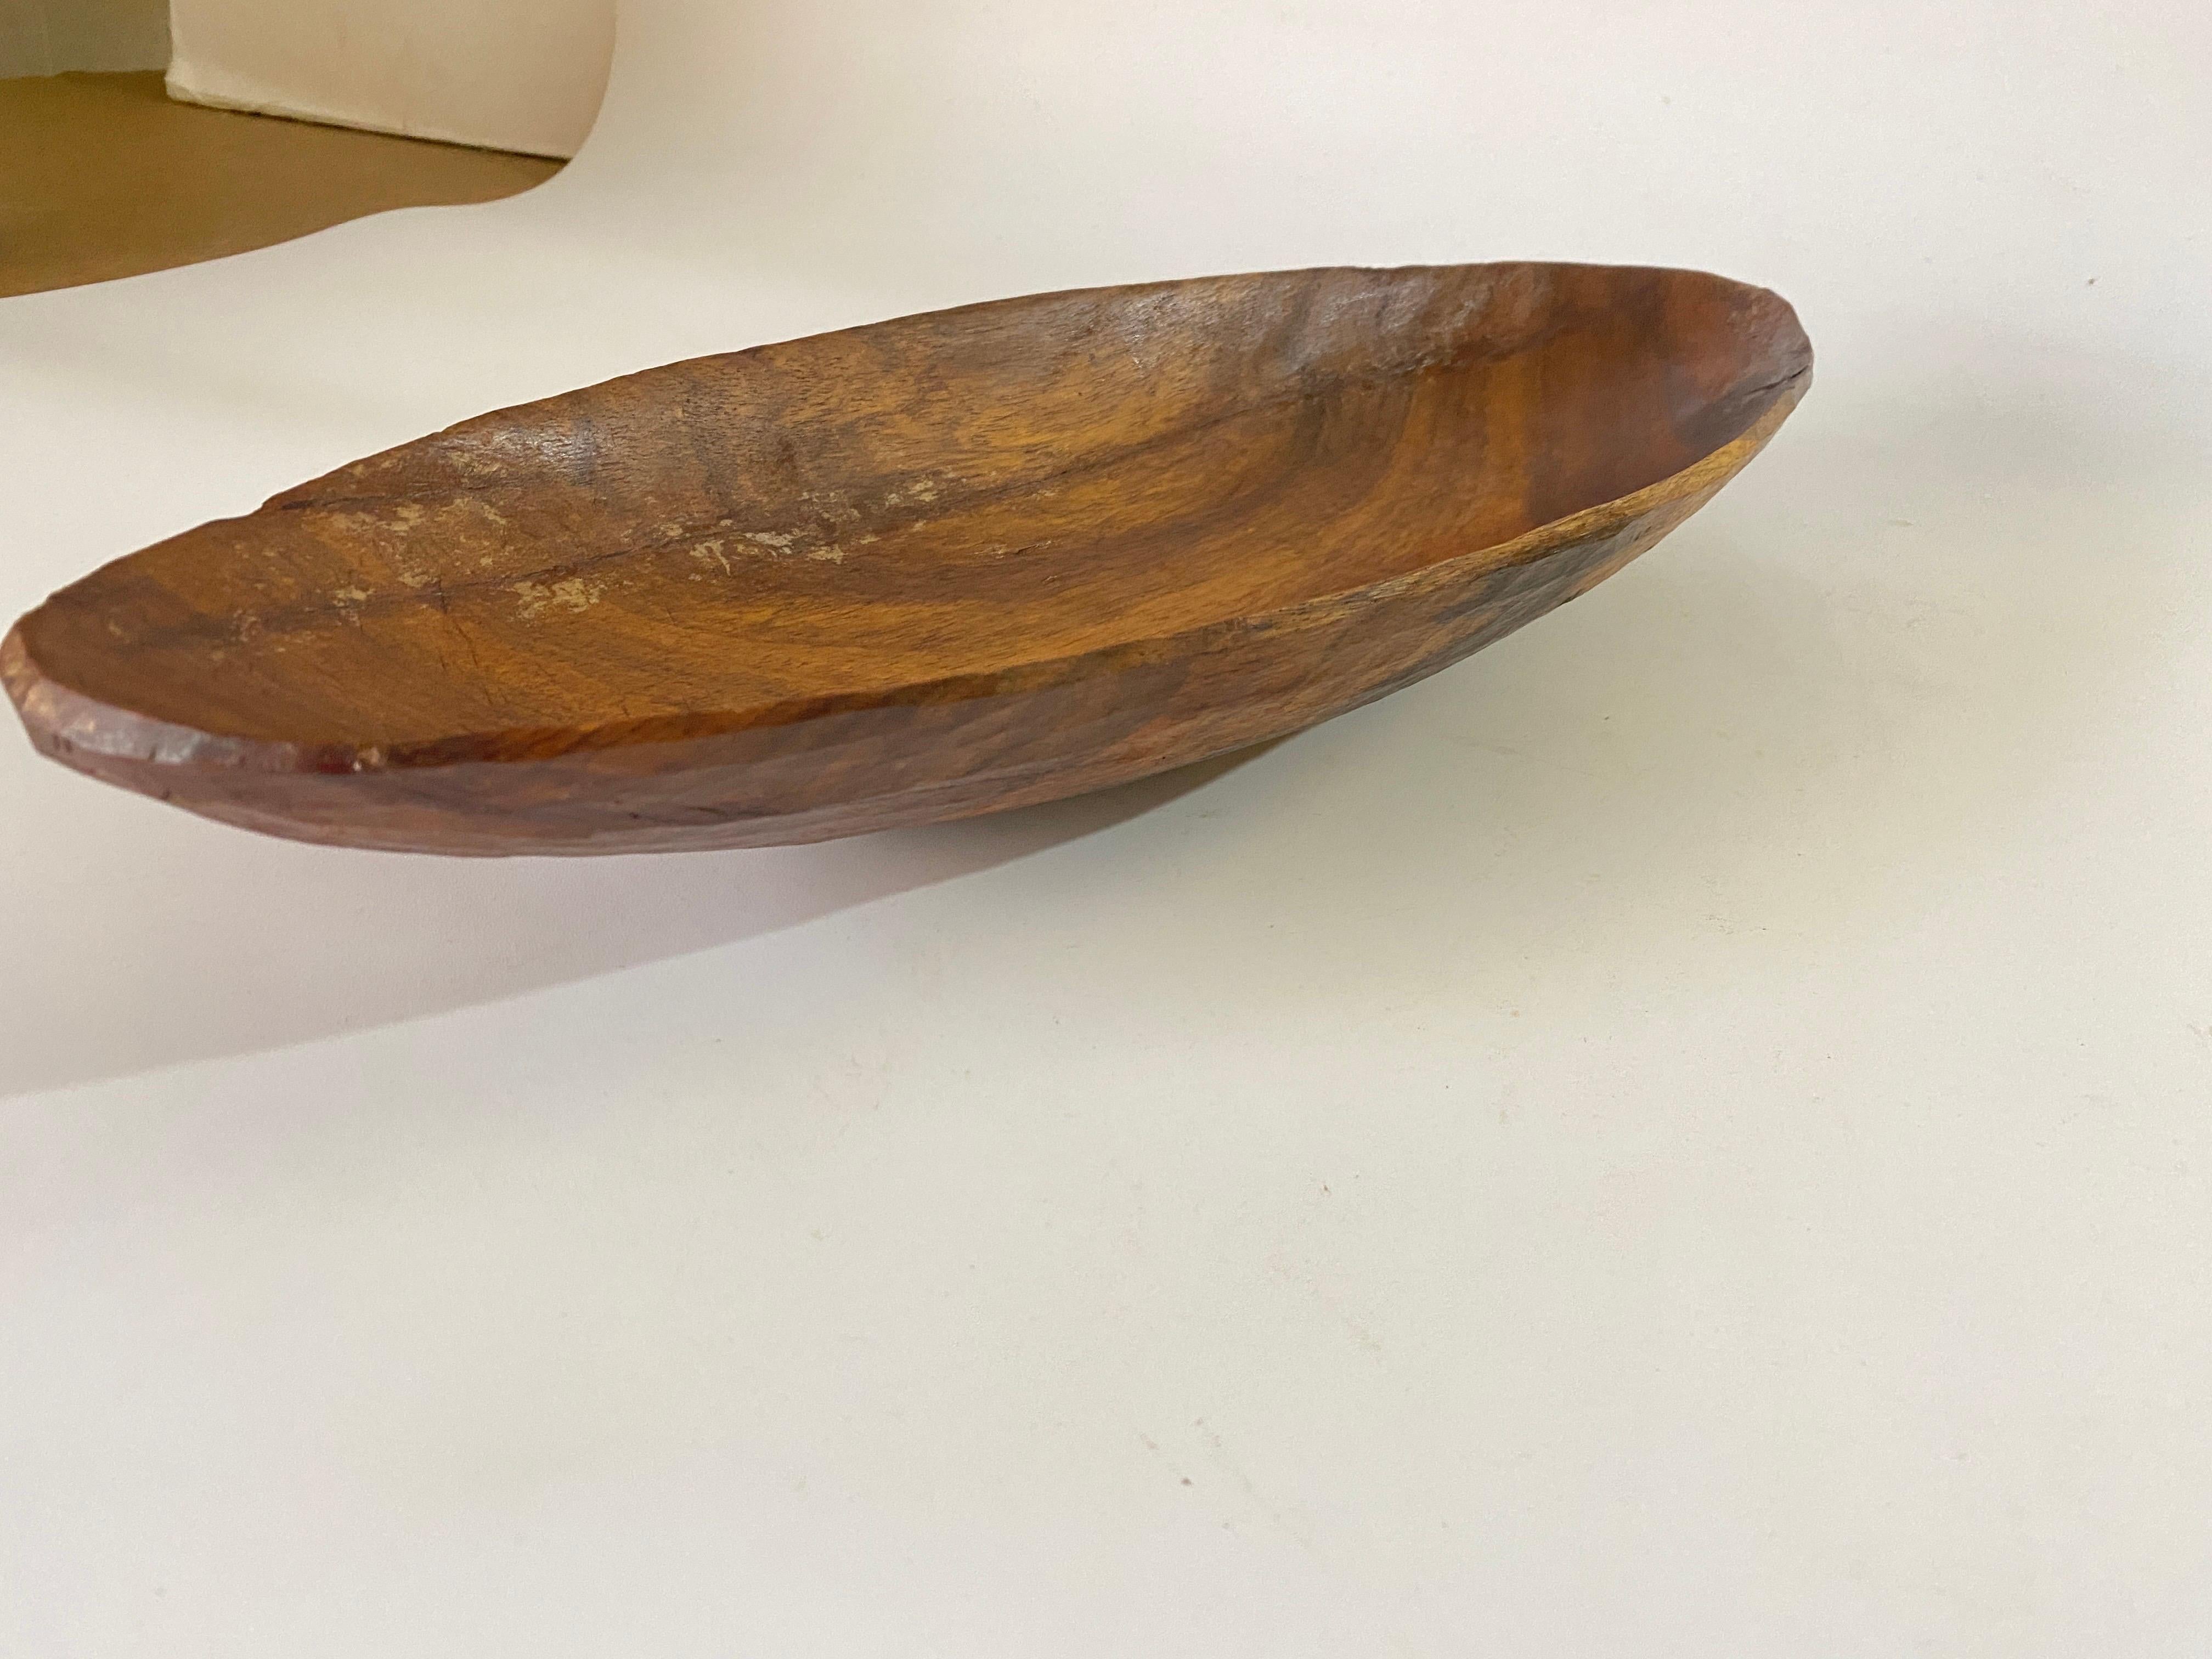 Brutalist Wood Bowl, Large, in a Brown Patina, France, circa 1960 In Good Condition For Sale In Auribeau sur Siagne, FR